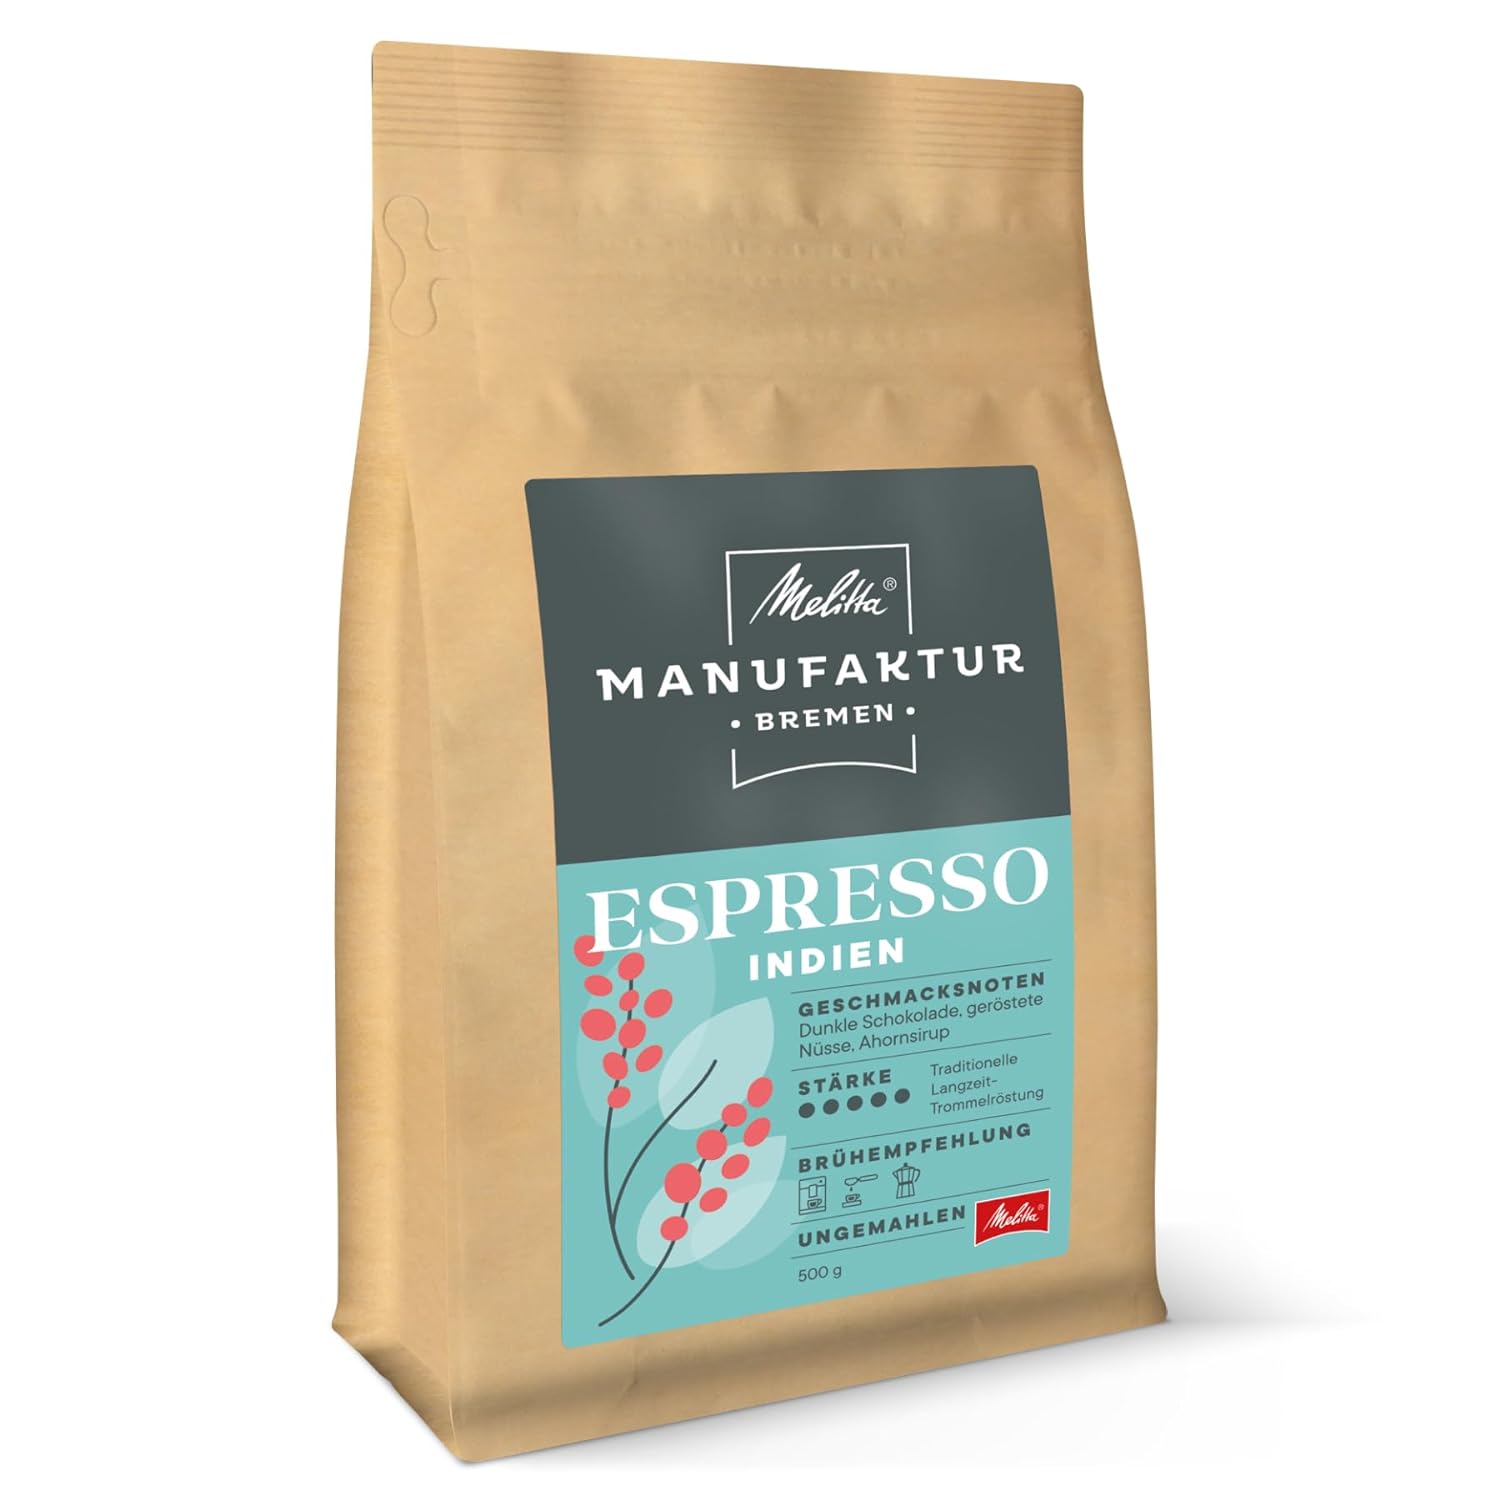 Melitta Manufacture Coffee Espresso Specialty Coffee, 500 g, Whole Coffee Beans, Unground, Single Origin Farm Coffee from India, Roasted in Germany, Strength 5